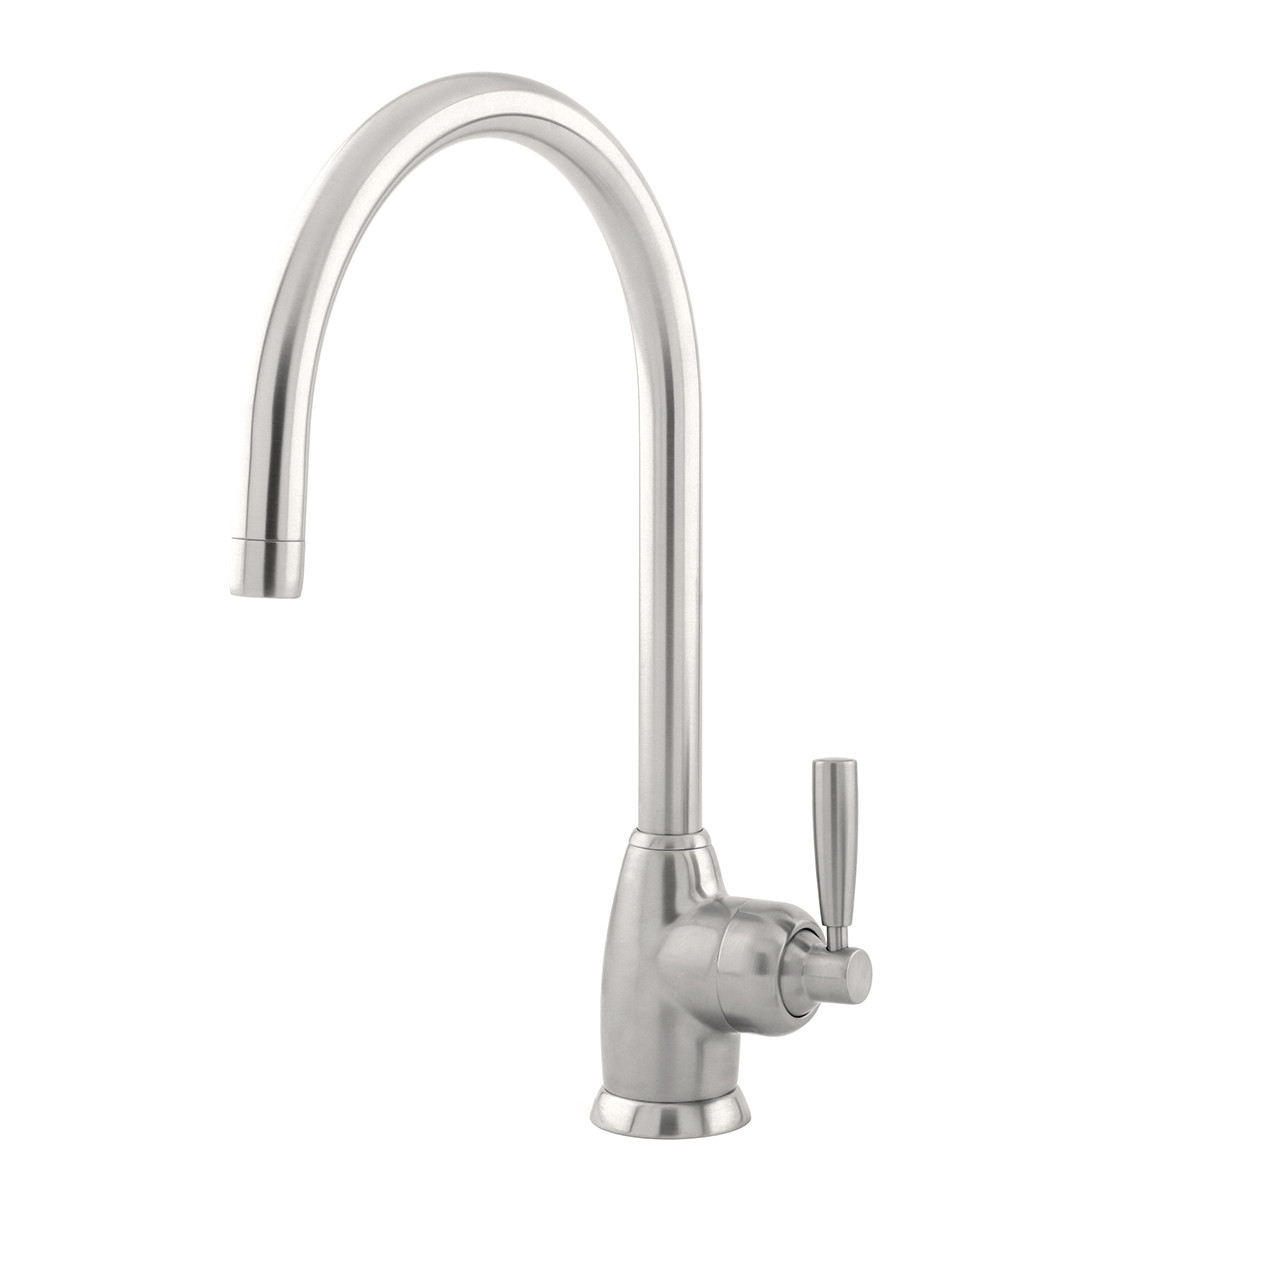 An image of Perrin & Rowe Mimas - C Spout 4841 Kitchen Tap